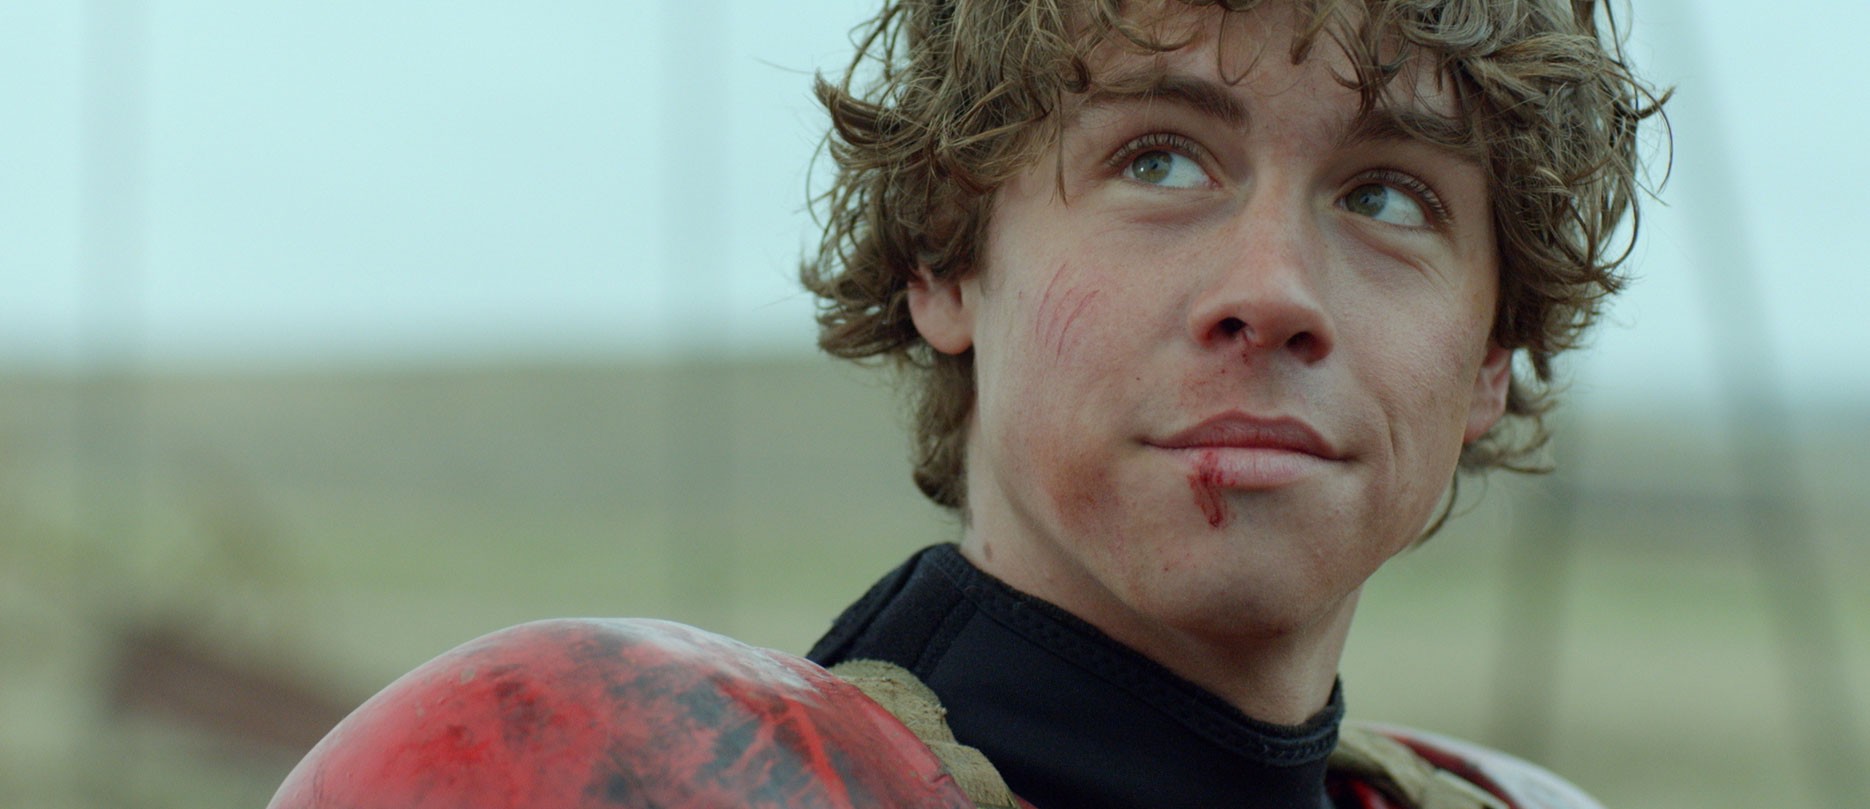 Munro Chambers stras as The Kid in Epic Pictures' Turbo Kid (2015)